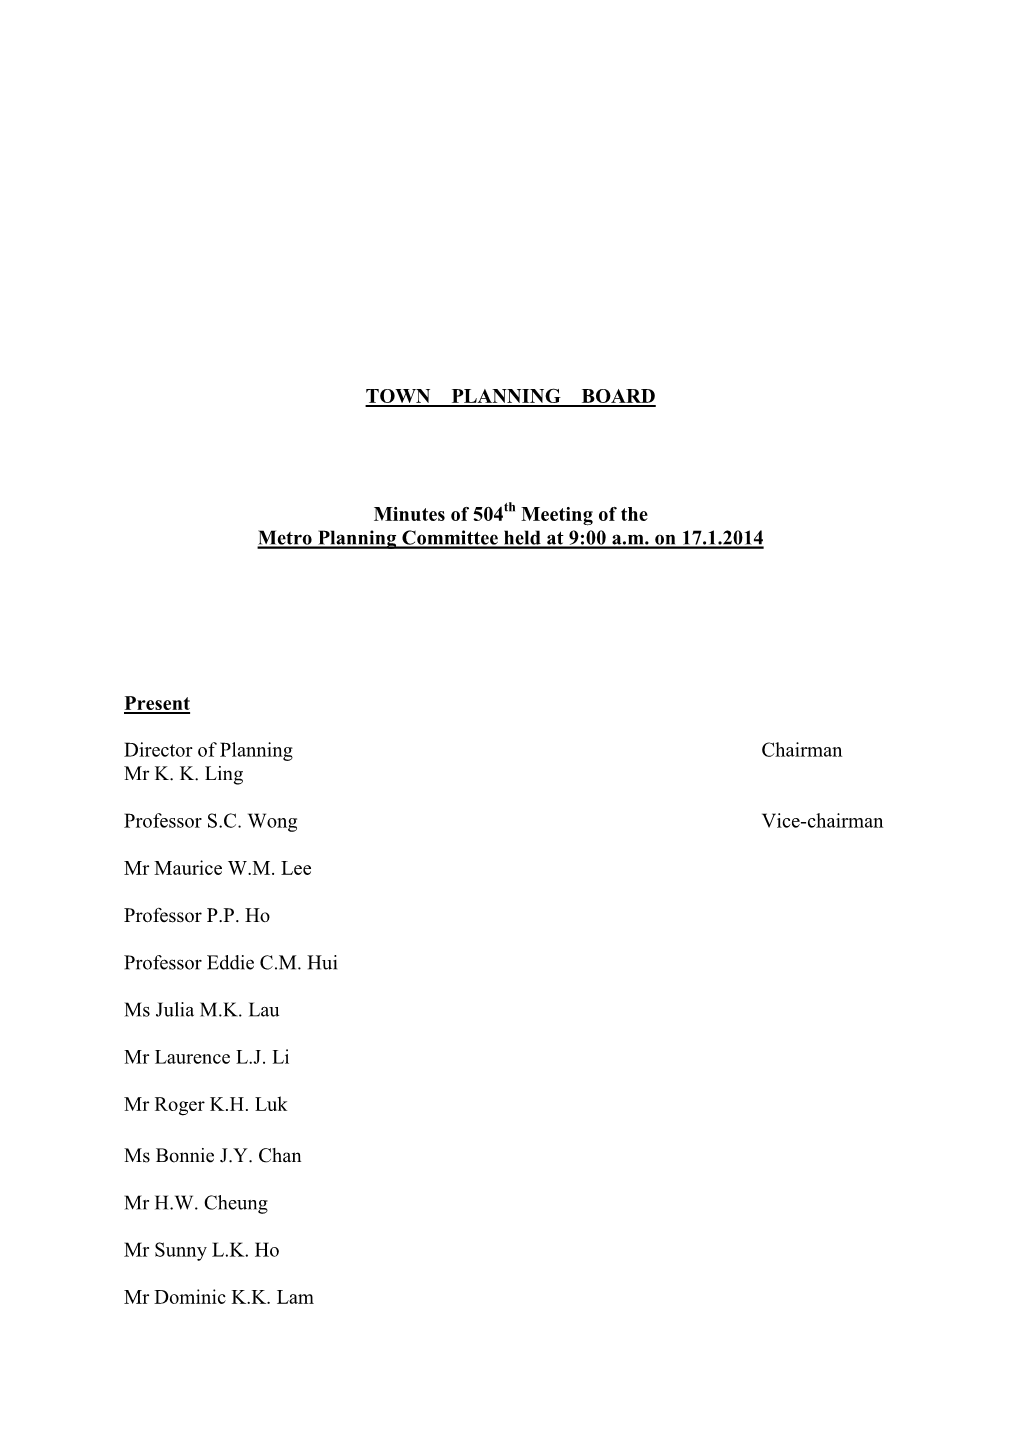 TOWN PLANNING BOARD Minutes of 504 Meeting of the Metro Planning